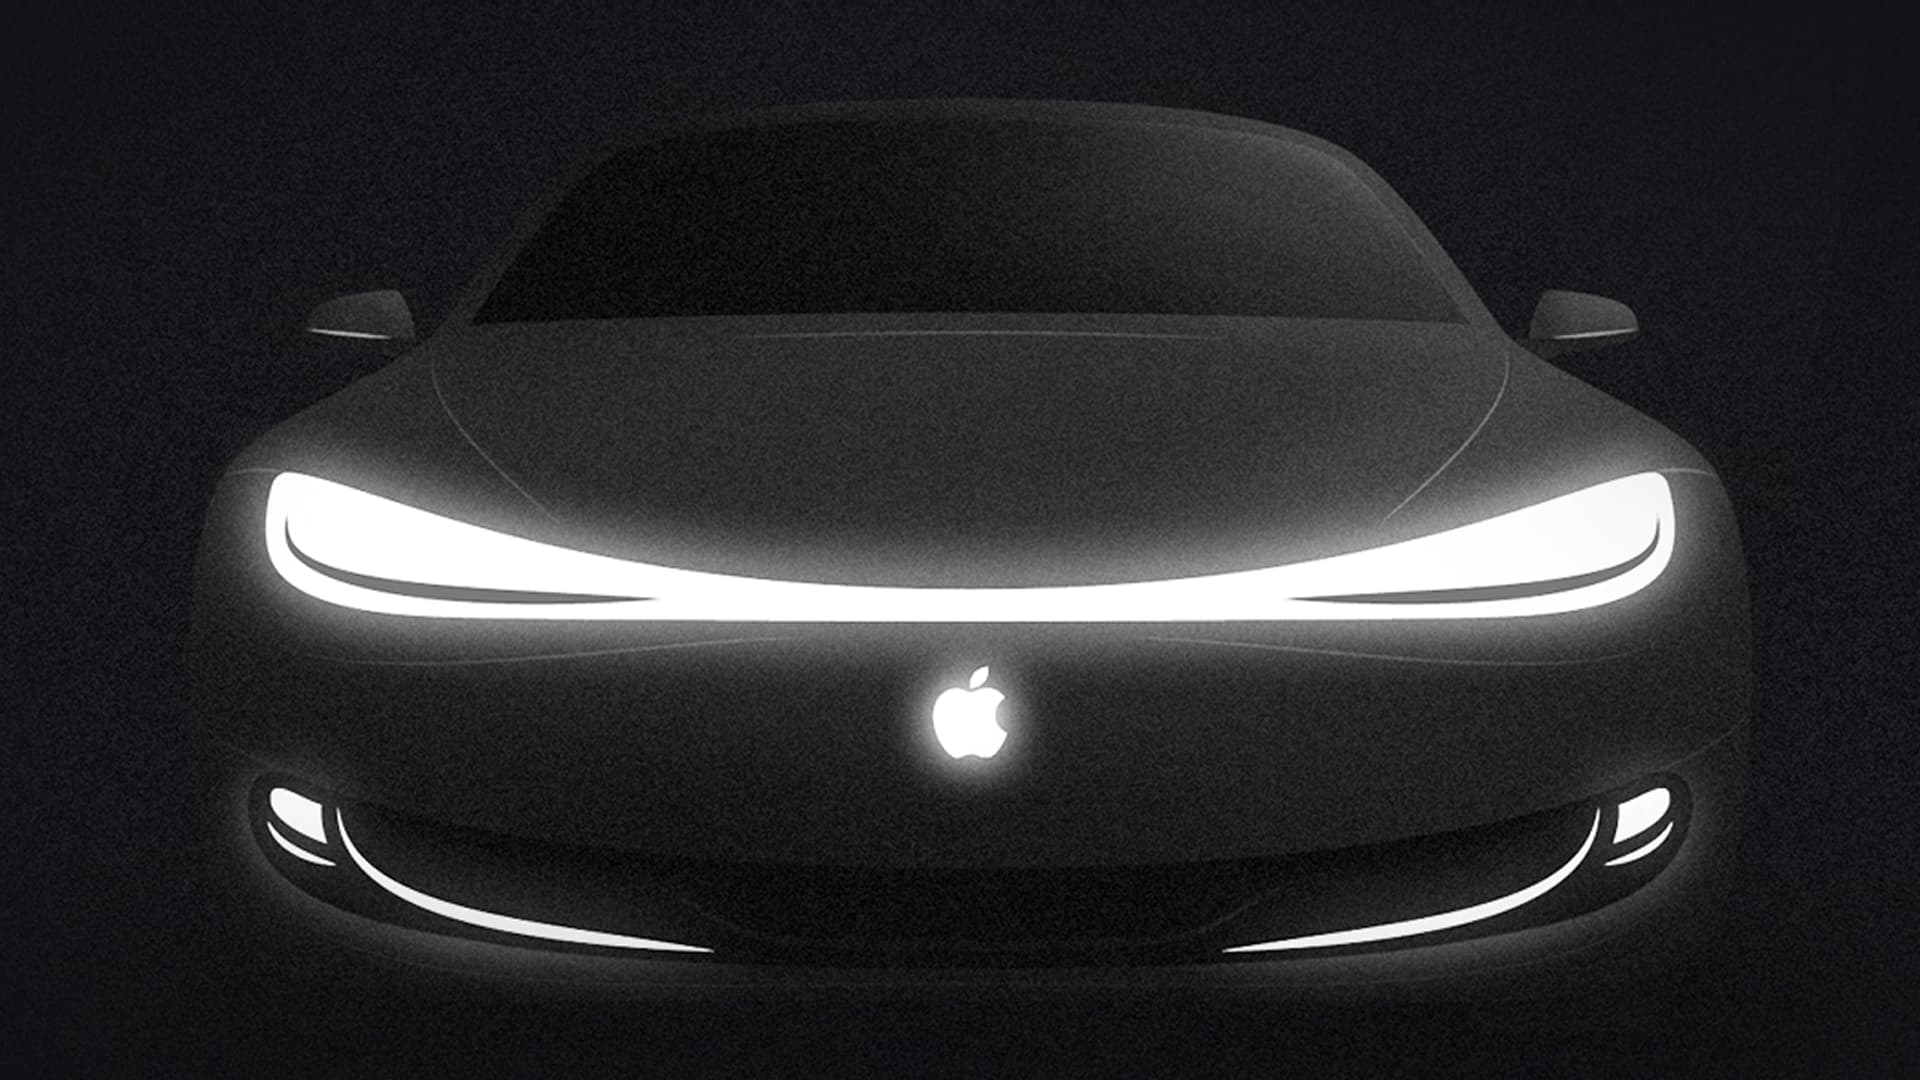 Apple Car news keeps coming – here's what we know so far